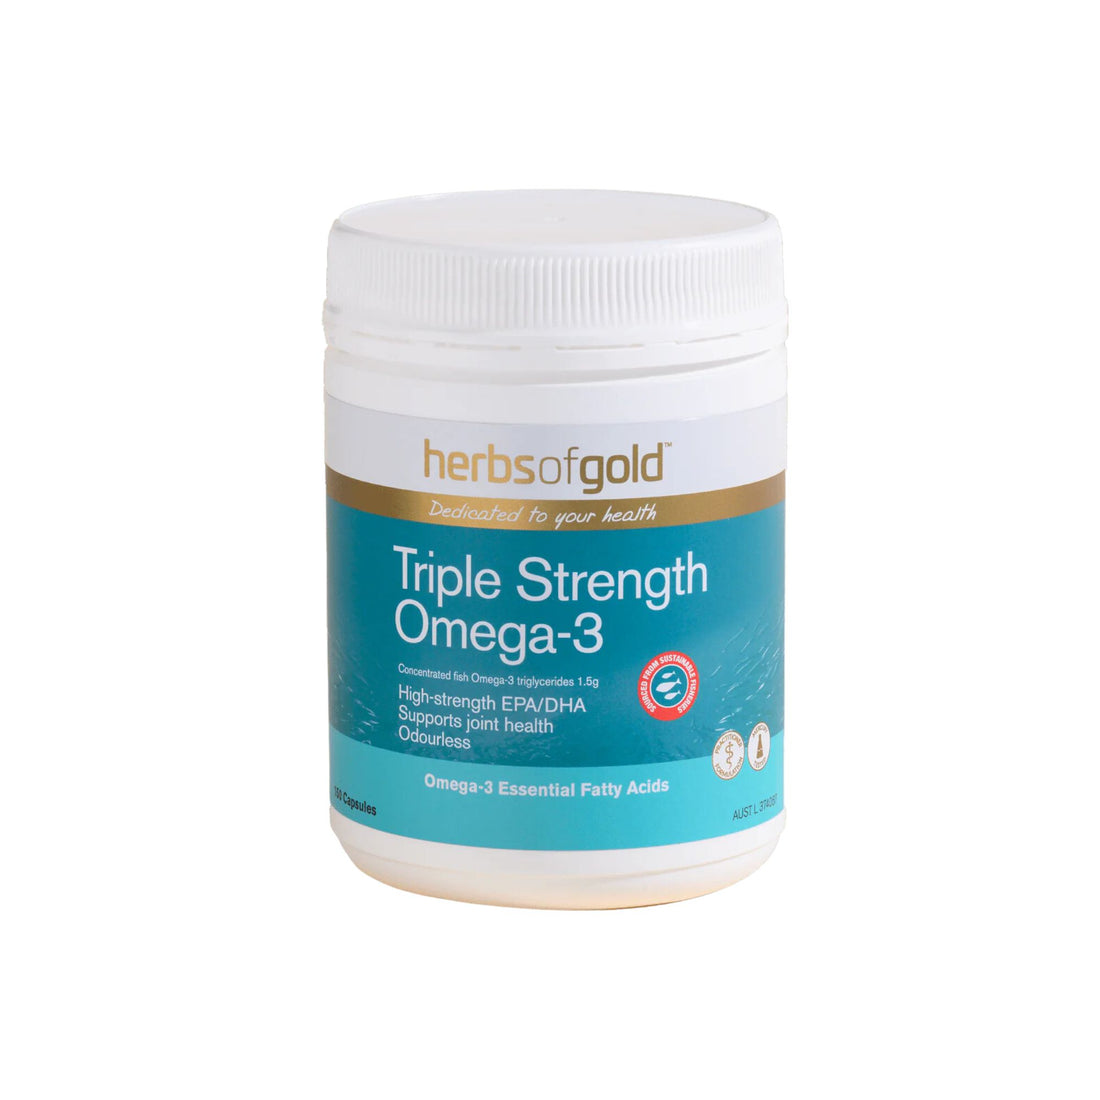 Herbs of Gold Triple Strength Omega 3 Fish Oil Vitamins and Health